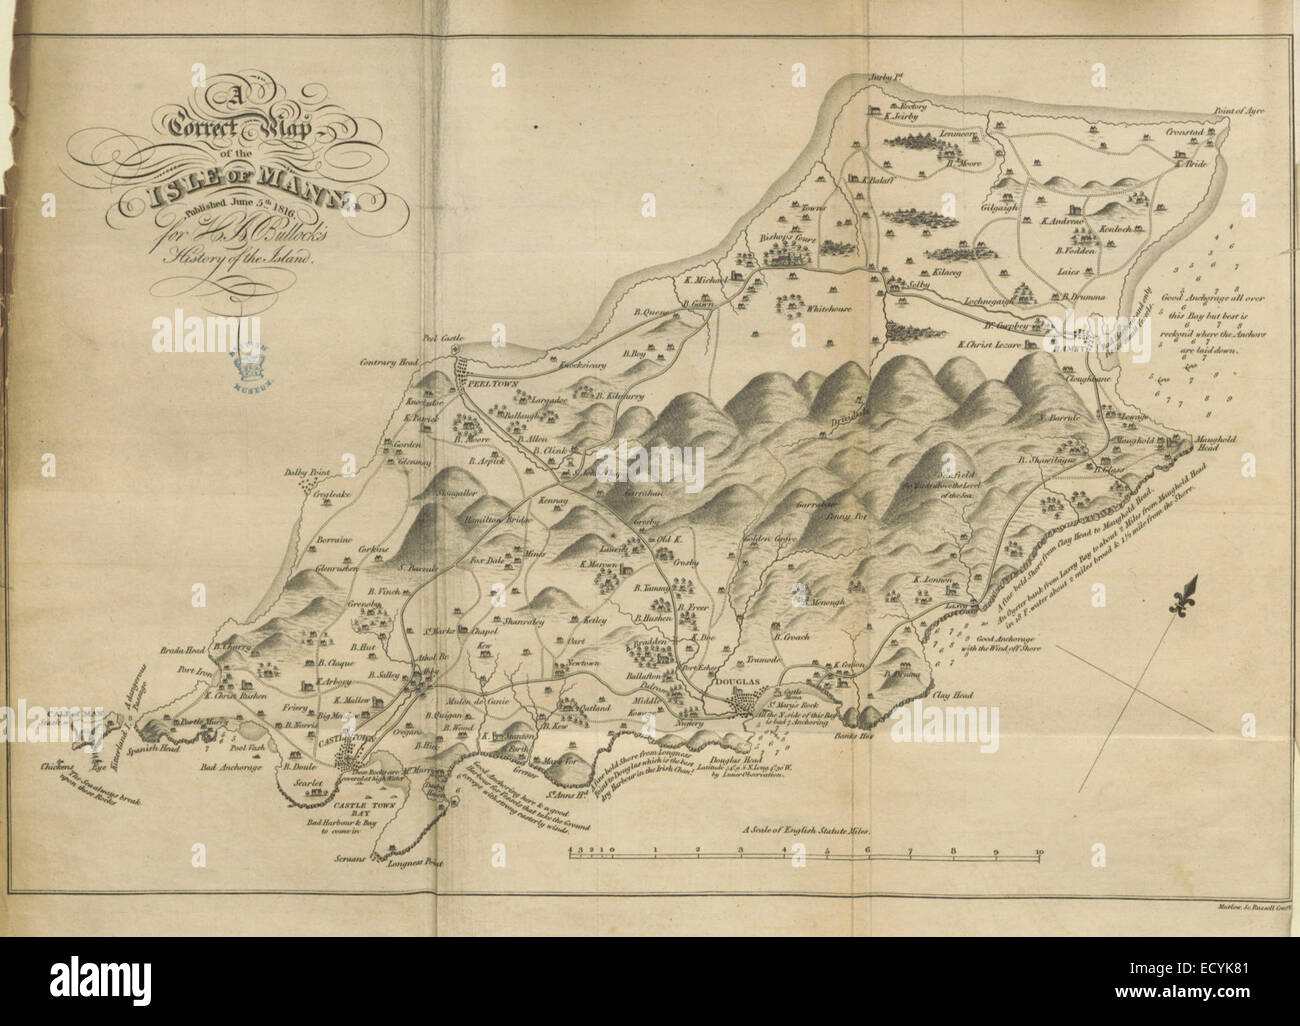 A Correct Map of the ISLE of MANN, published 1816 Stock Photo